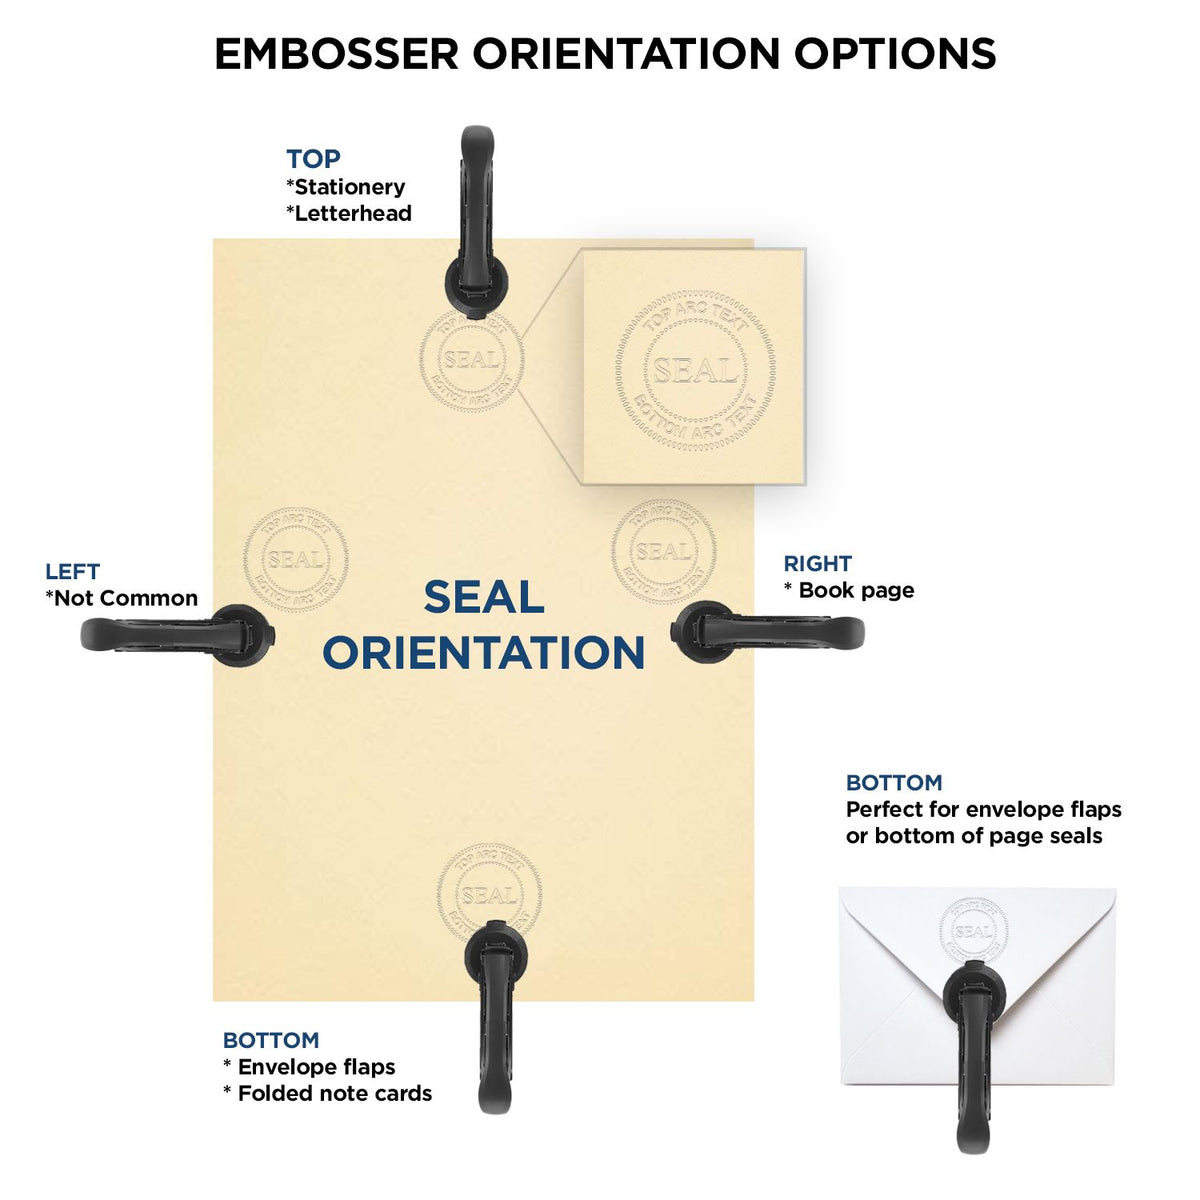 An infographic for the Gift Missouri Land Surveyor Seal showing embosser orientation, this is showing examples of a top, bottom, right and left insert.